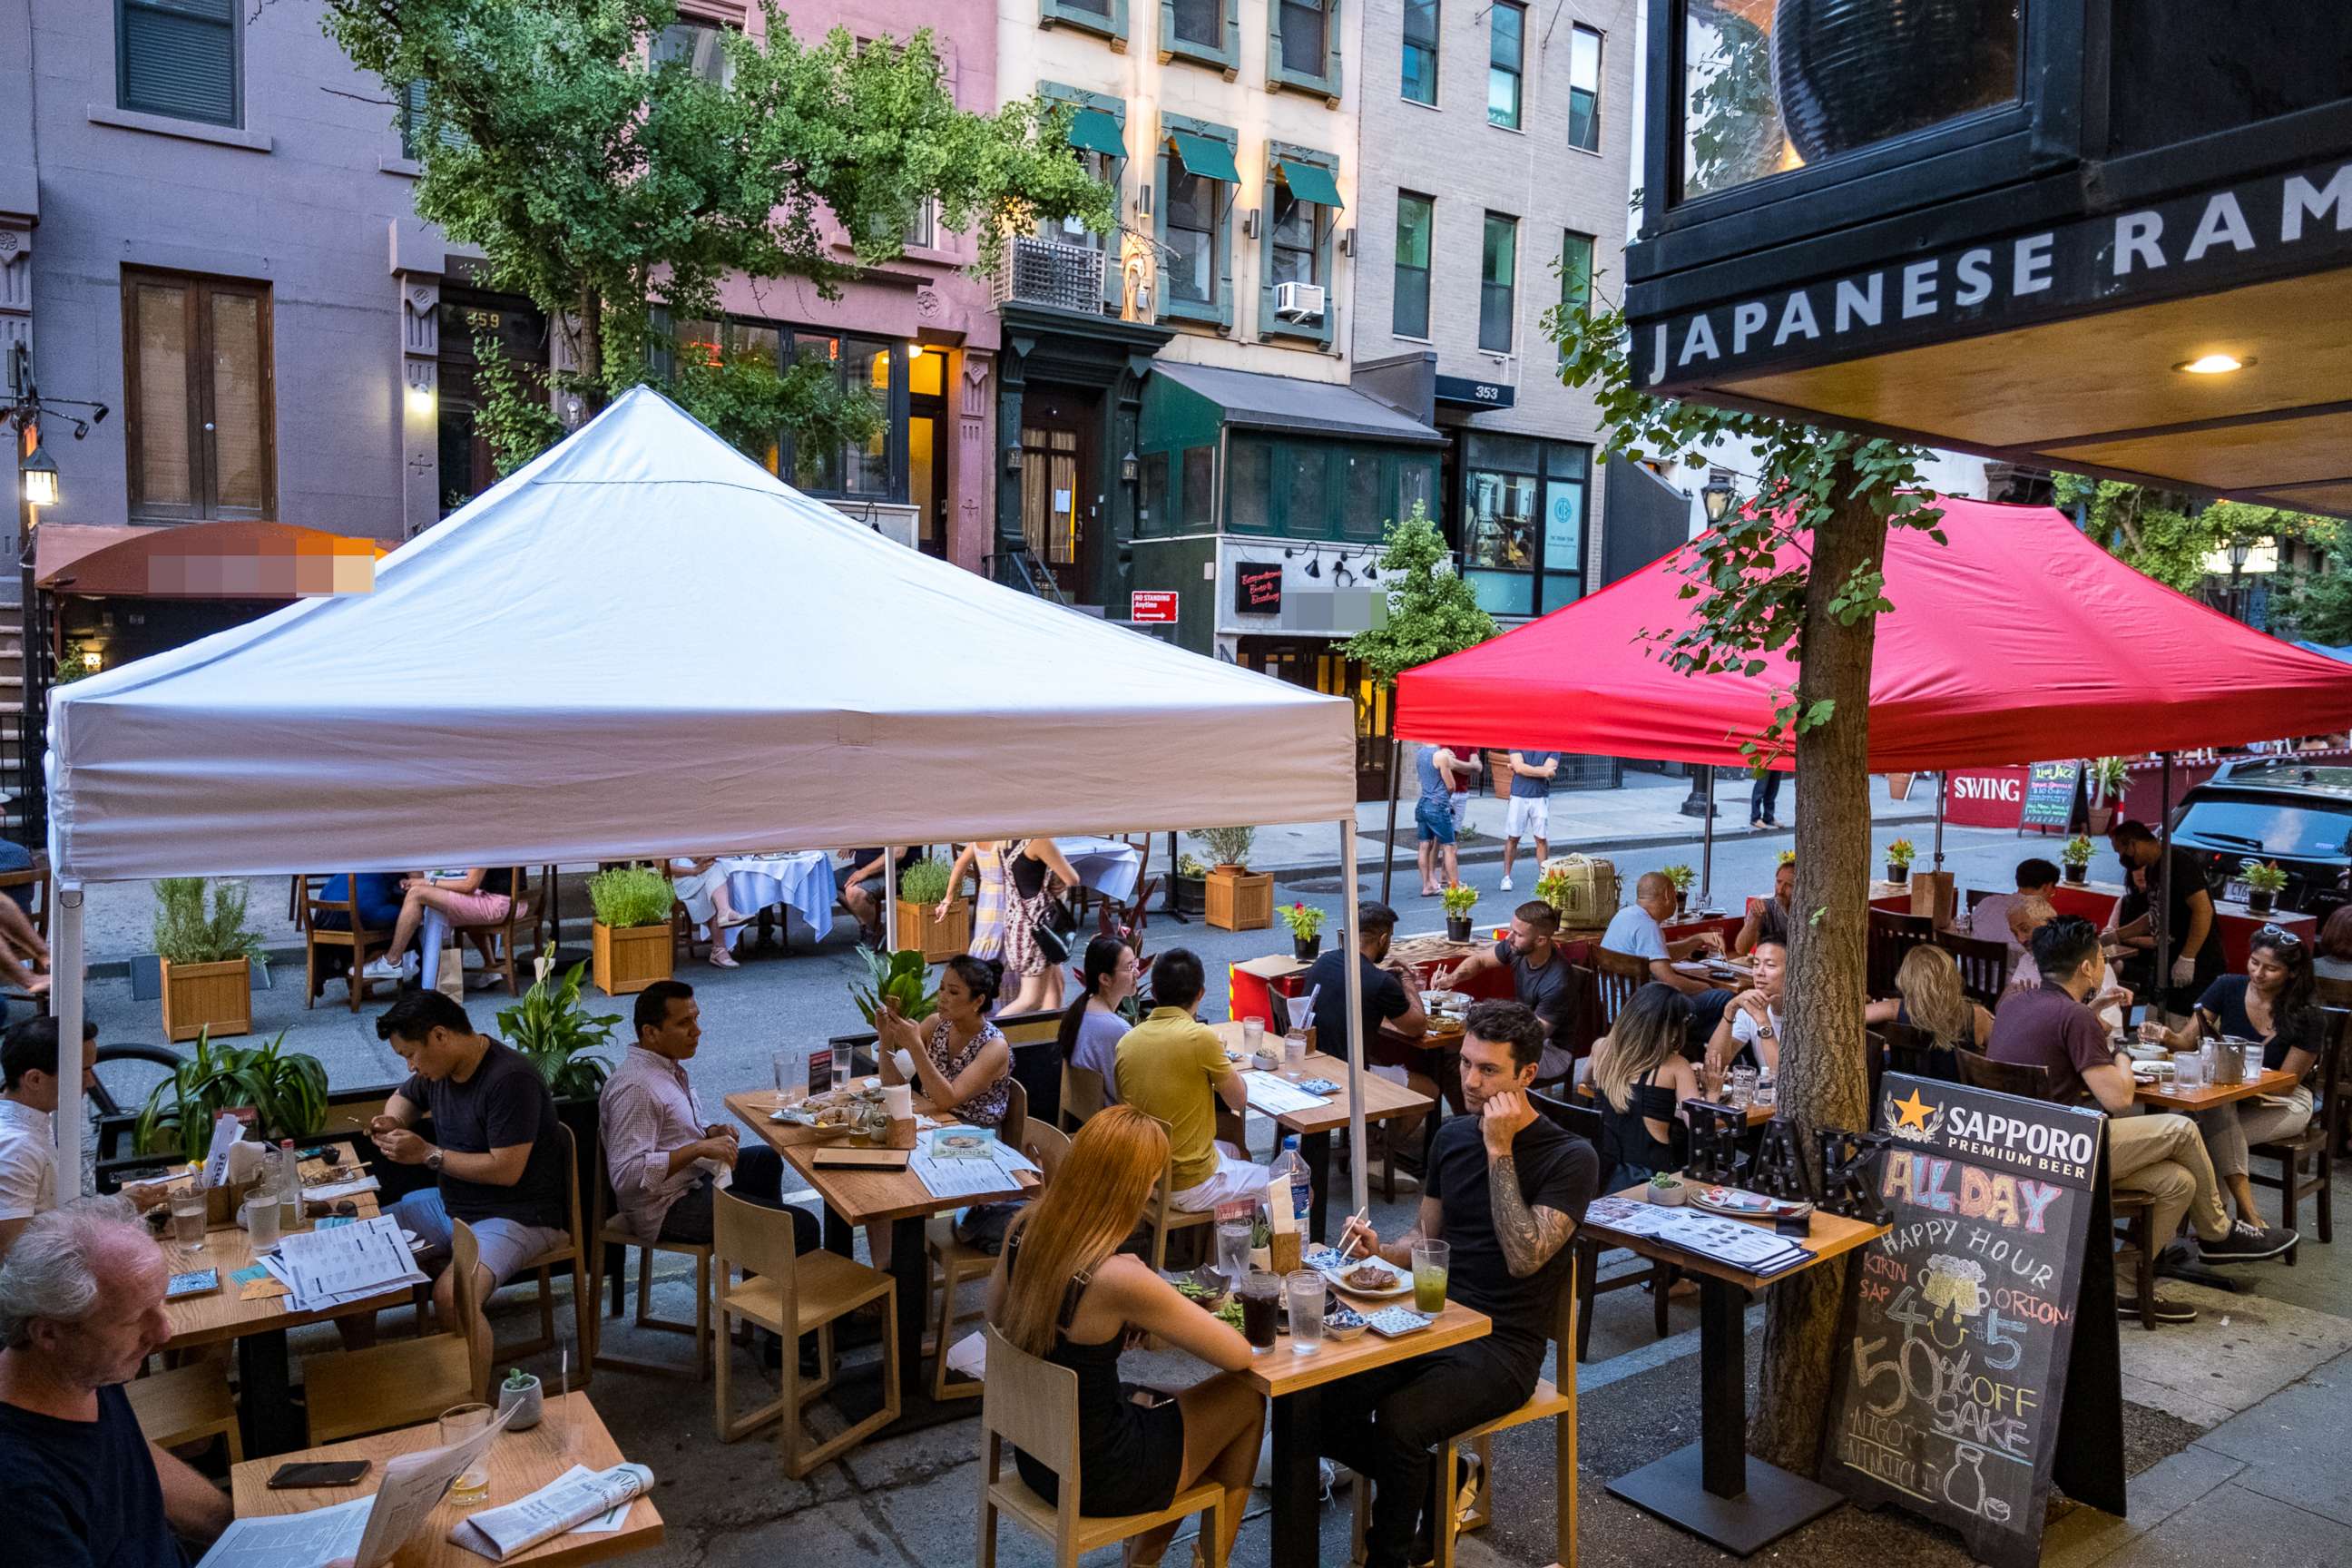 PHOTO: People dine al fresco, or open air, in Hell's Kitchen on July 21, 2020 in New York City.